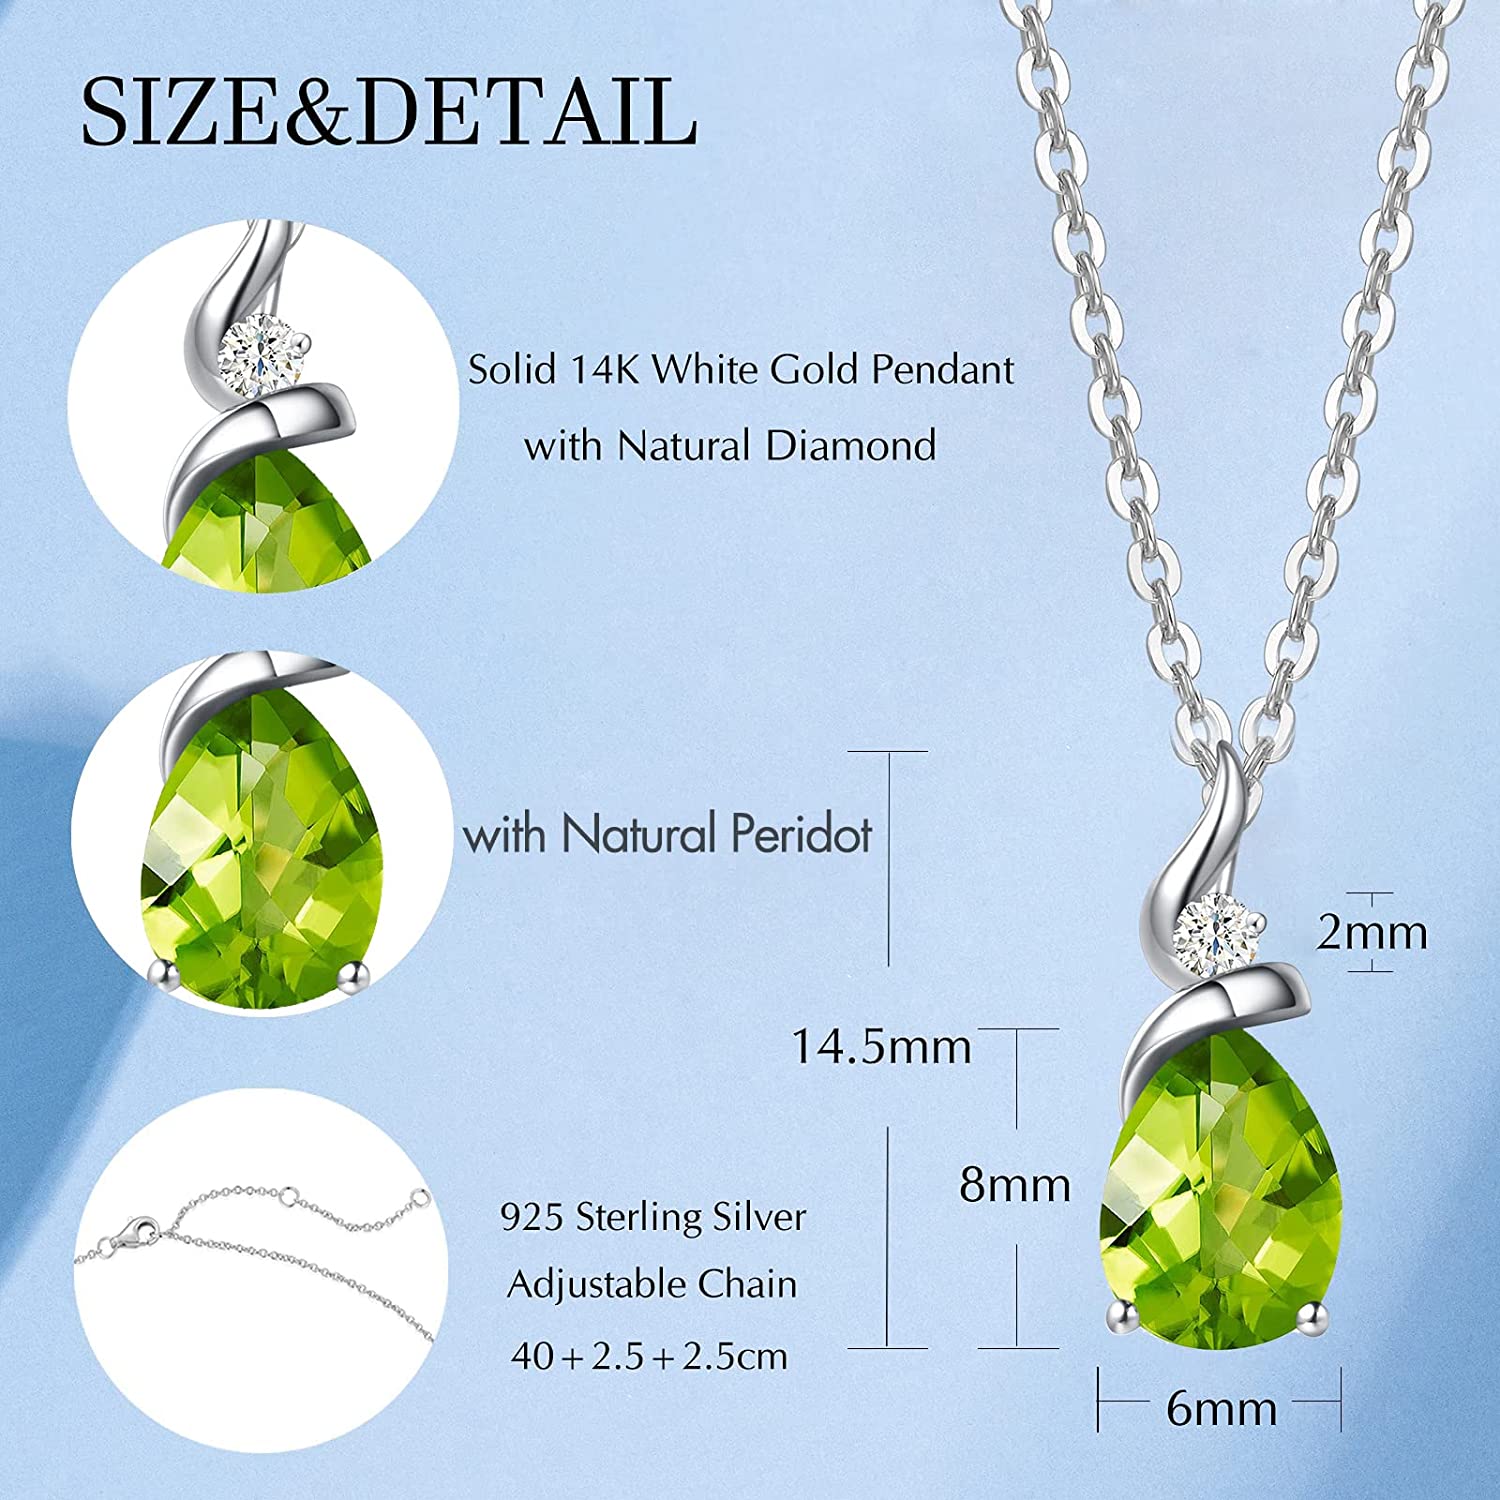 FANCIME "Ribbon" Peridot August Gemstone Sterling Silver Necklace Size